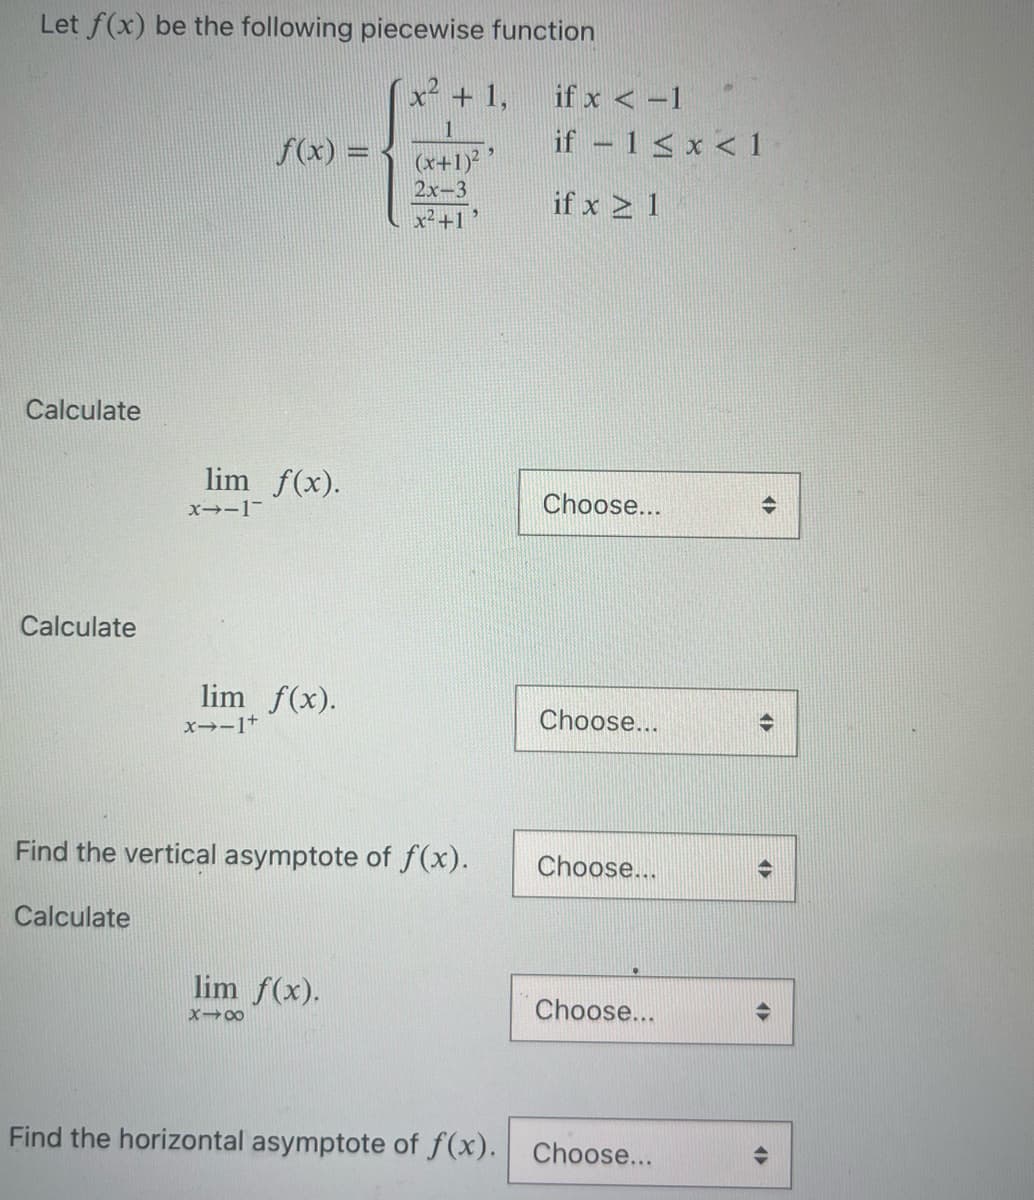 Let f(x) be the following piecewise function
x² + 1,
Calculate
Calculate
lim f(x).
x-1¯
f(x) =
lim f(x).
x-1+
(x+1)²
2x-3
x²+1
Find the vertical asymptote of f(x).
Calculate
lim f(x).
x48
if x < -1
if - 1<x< 1
if x ≥ 1
Choose...
Choose...
Choose...
Choose...
Find the horizontal asymptote of f(x). Choose...
<►
4
AP
4